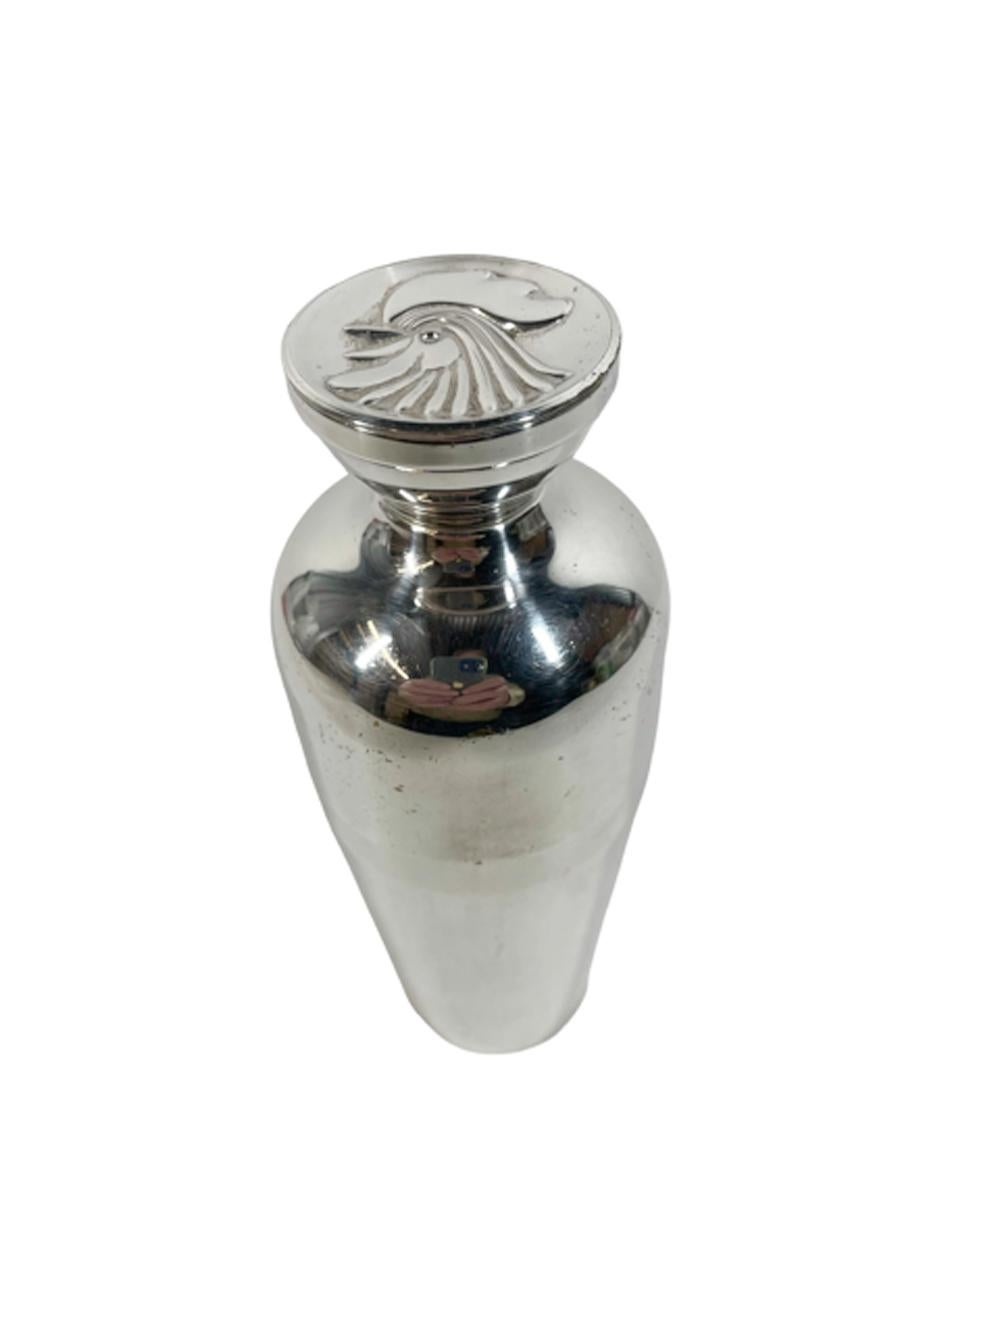 Art Deco silver plate individual size cocktail shaker by Napier. The bottom with an integral ice dam / strainer and the cover with a rooster decorated flat top allowing it to stand upright for use as a cocktail glass. 